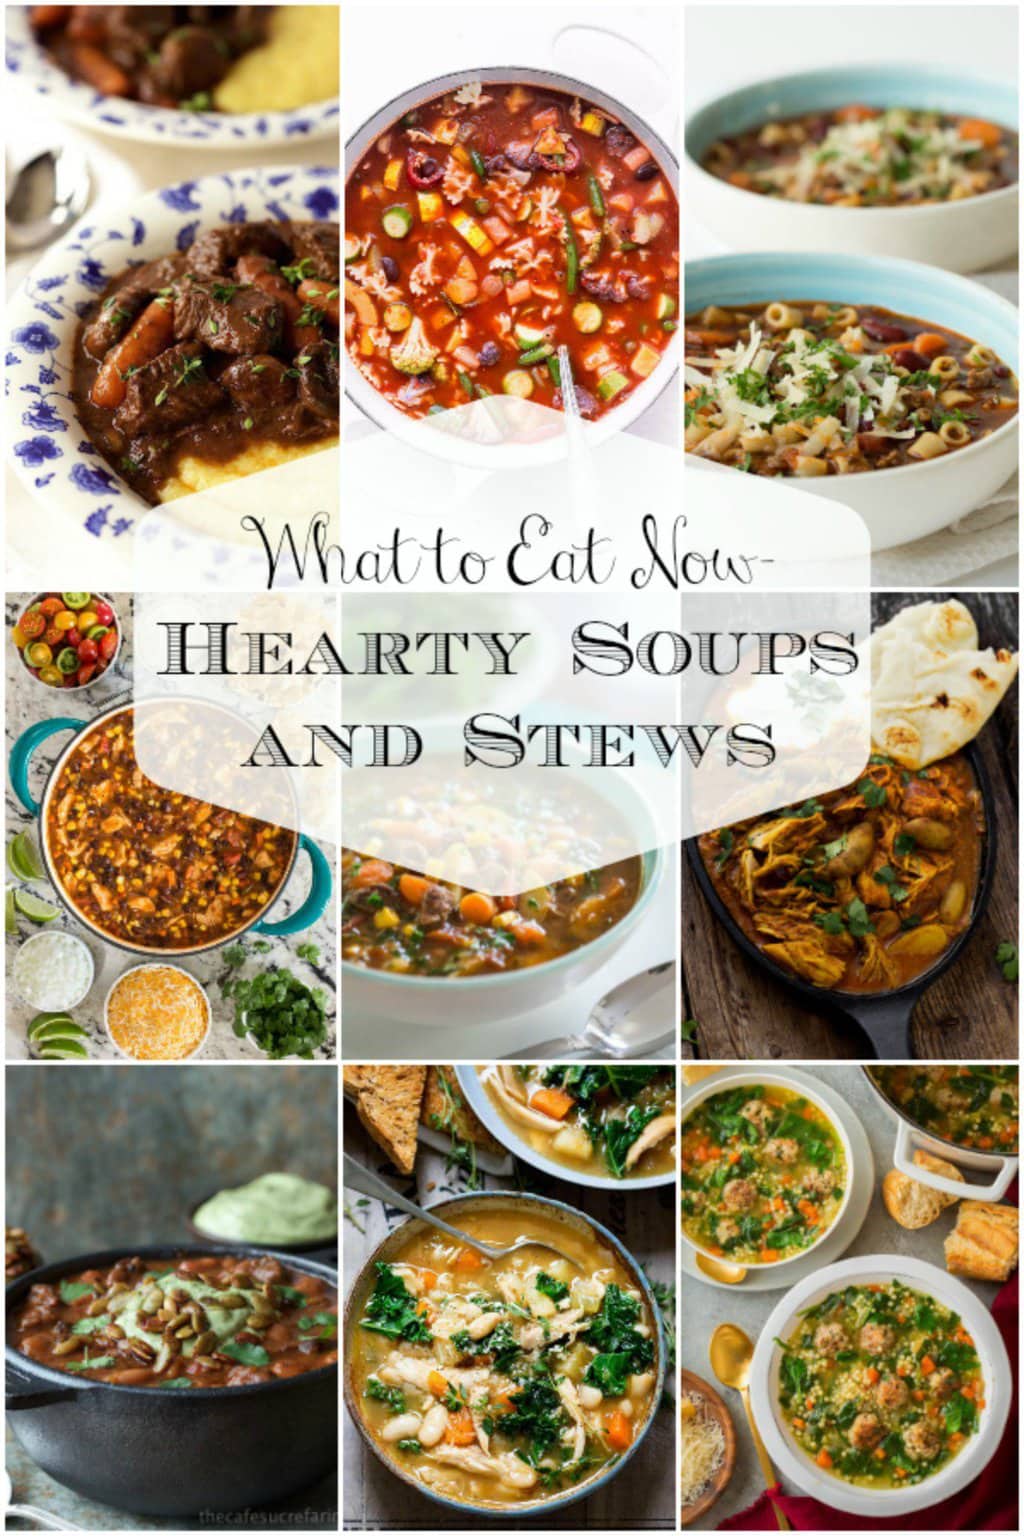 Collage of hearty soups and stews